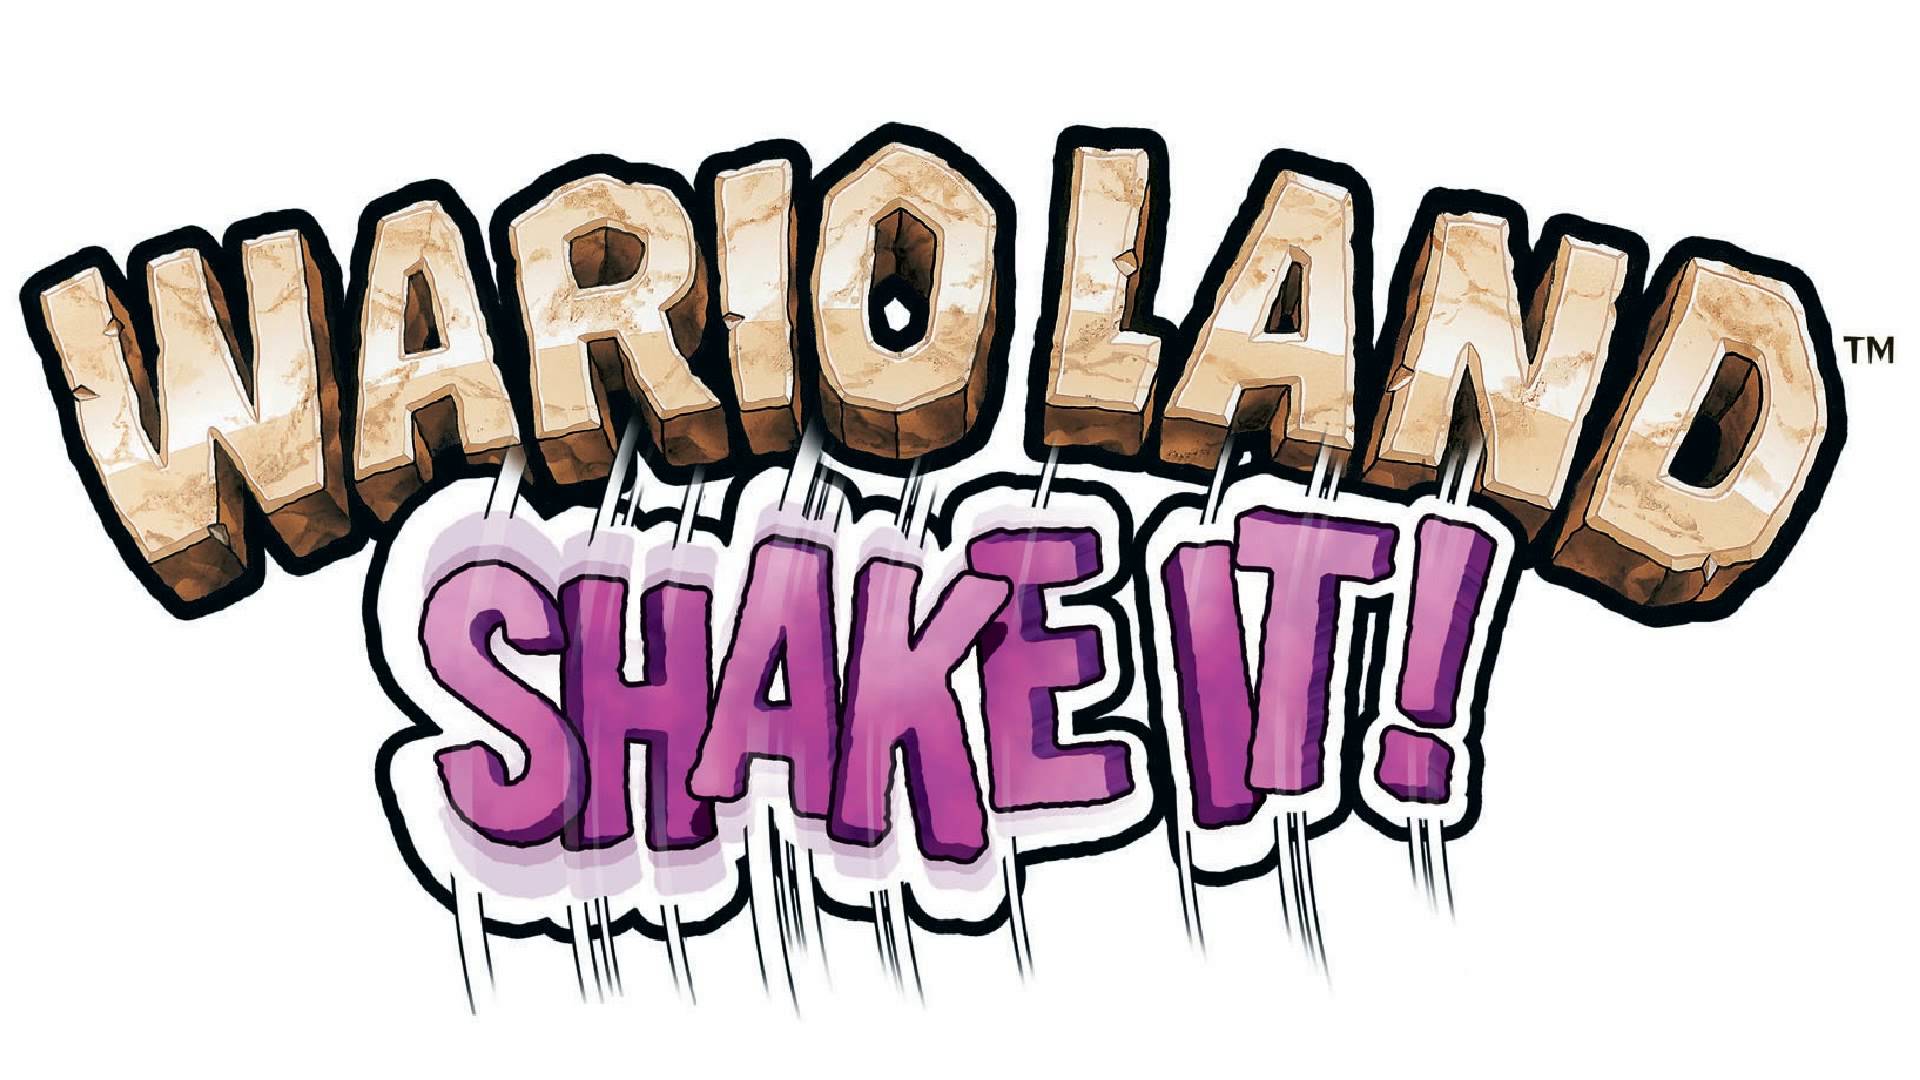 Wario Land: Shake It! Backgrounds, Compatible - PC, Mobile, Gadgets| 1920x1080 px